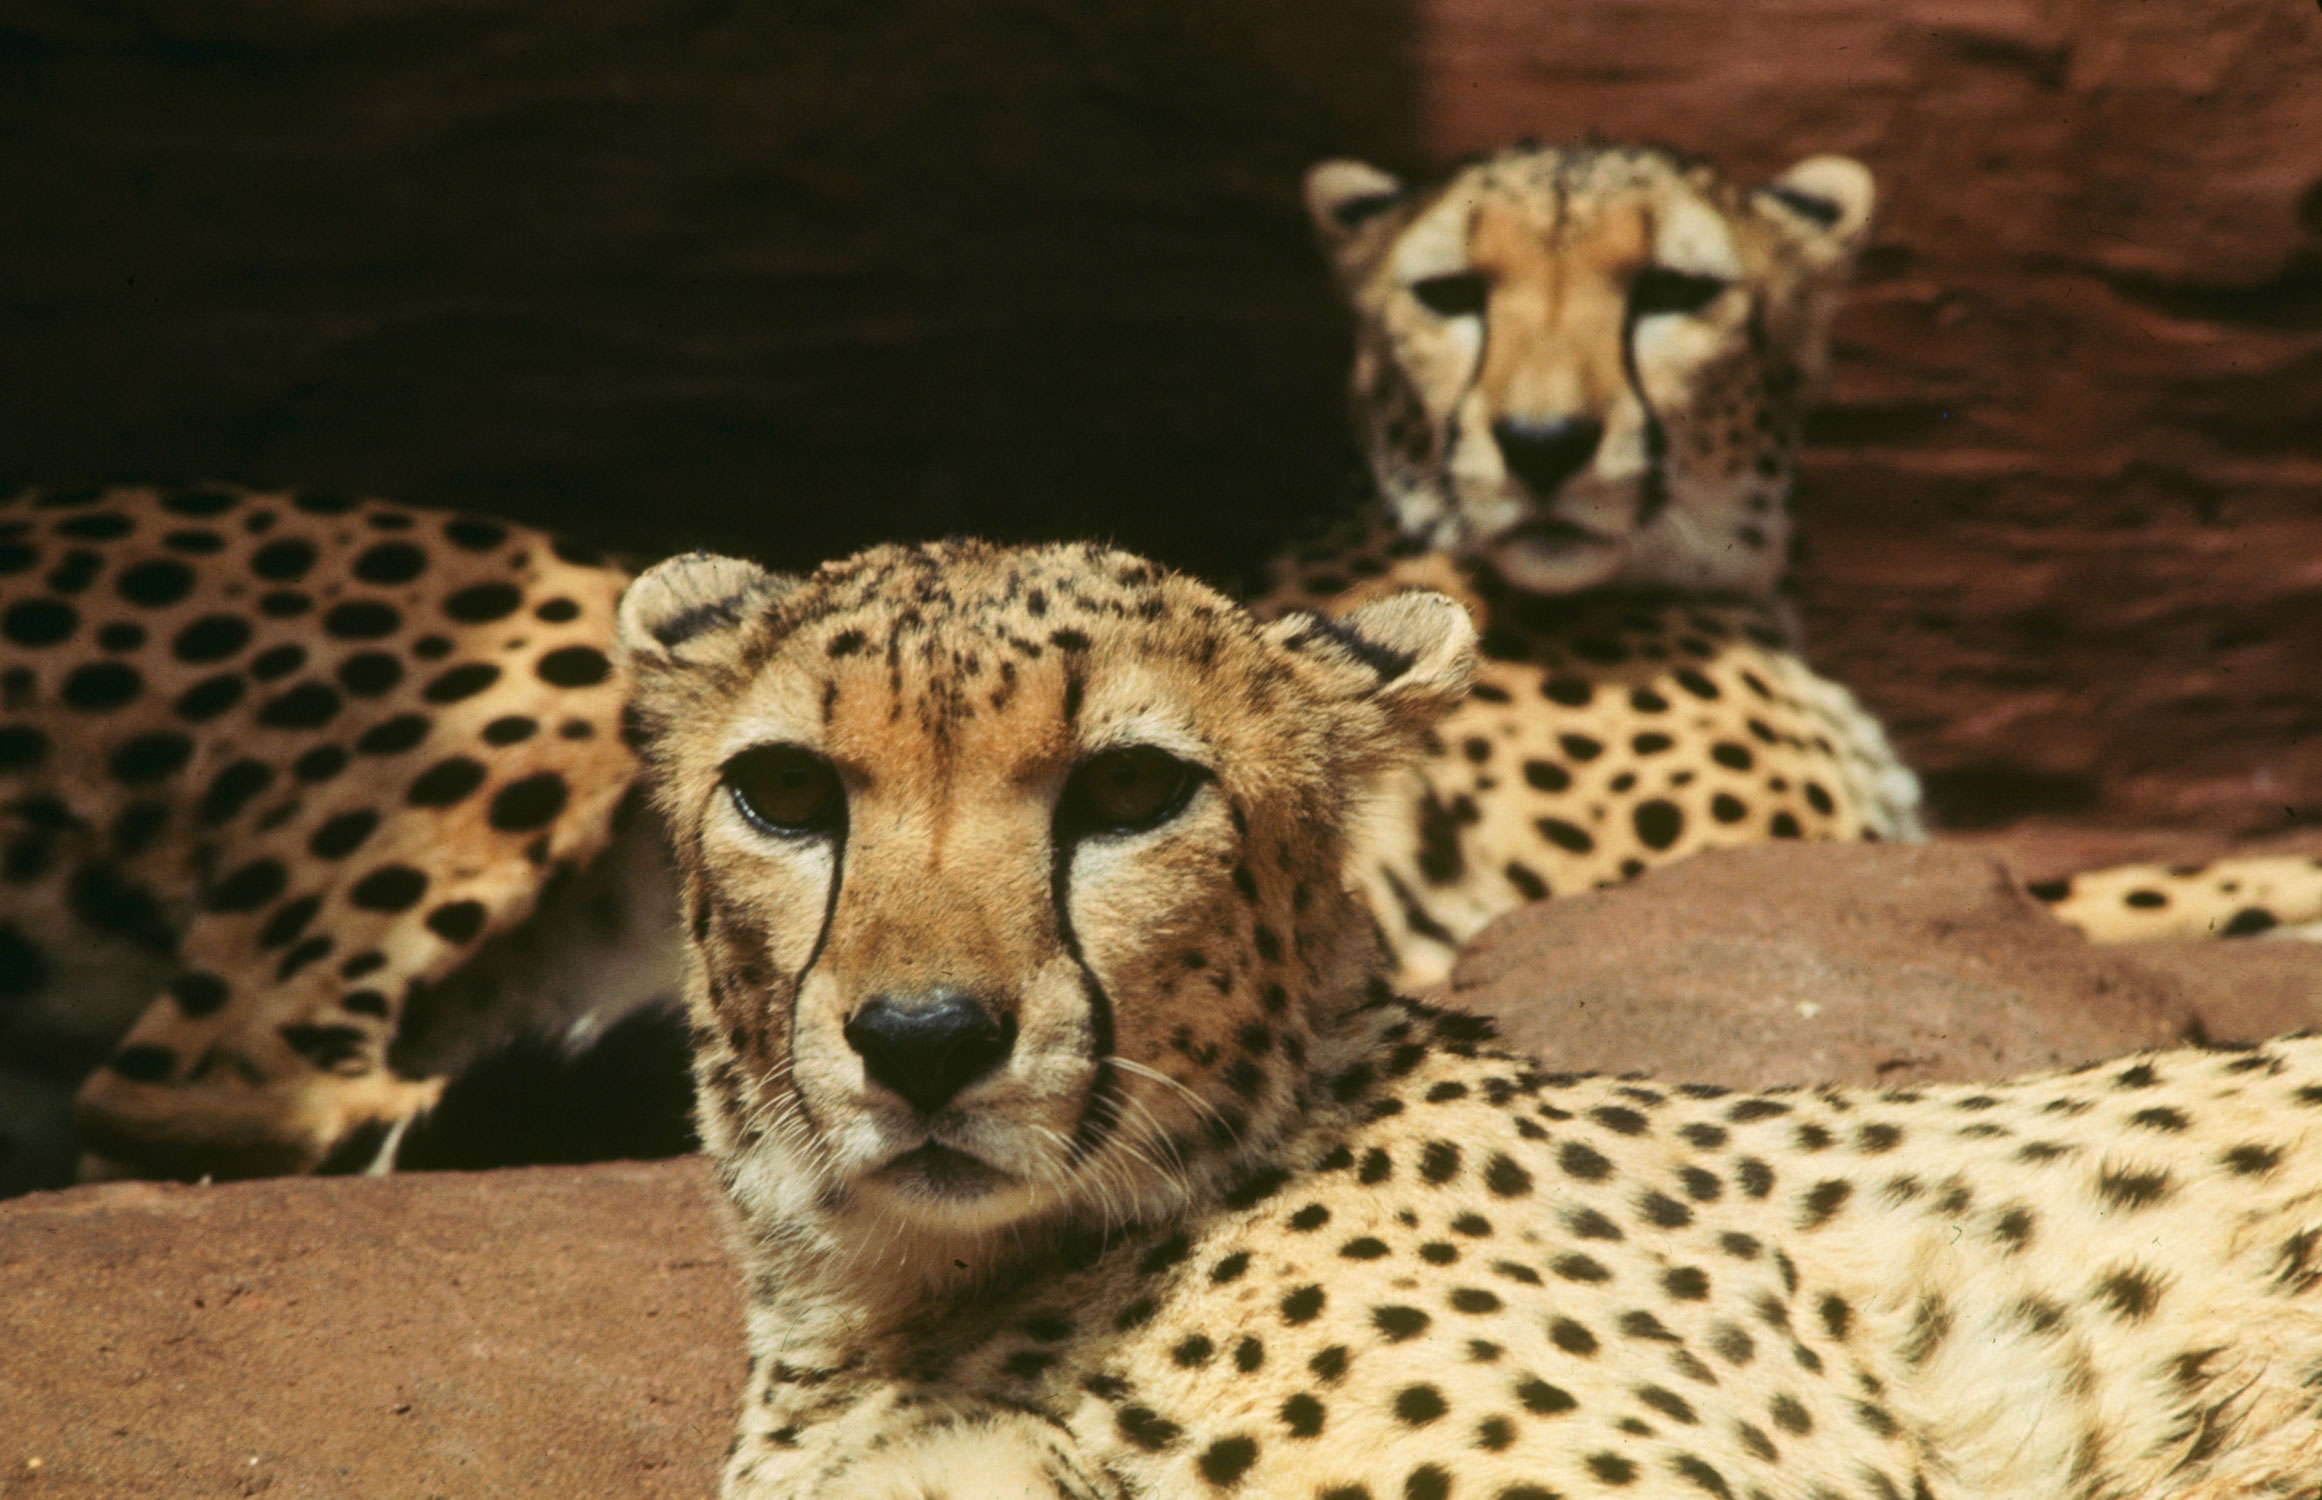 The cheetah, which is native to Africa and India, grows lethargic in captivity and does not mate. At the Oklahoma zoo the docile male (above) is being given plenty of exercise in the hopes of solving the problem. In fact the zoo believes the female (rear) may be pregnant.